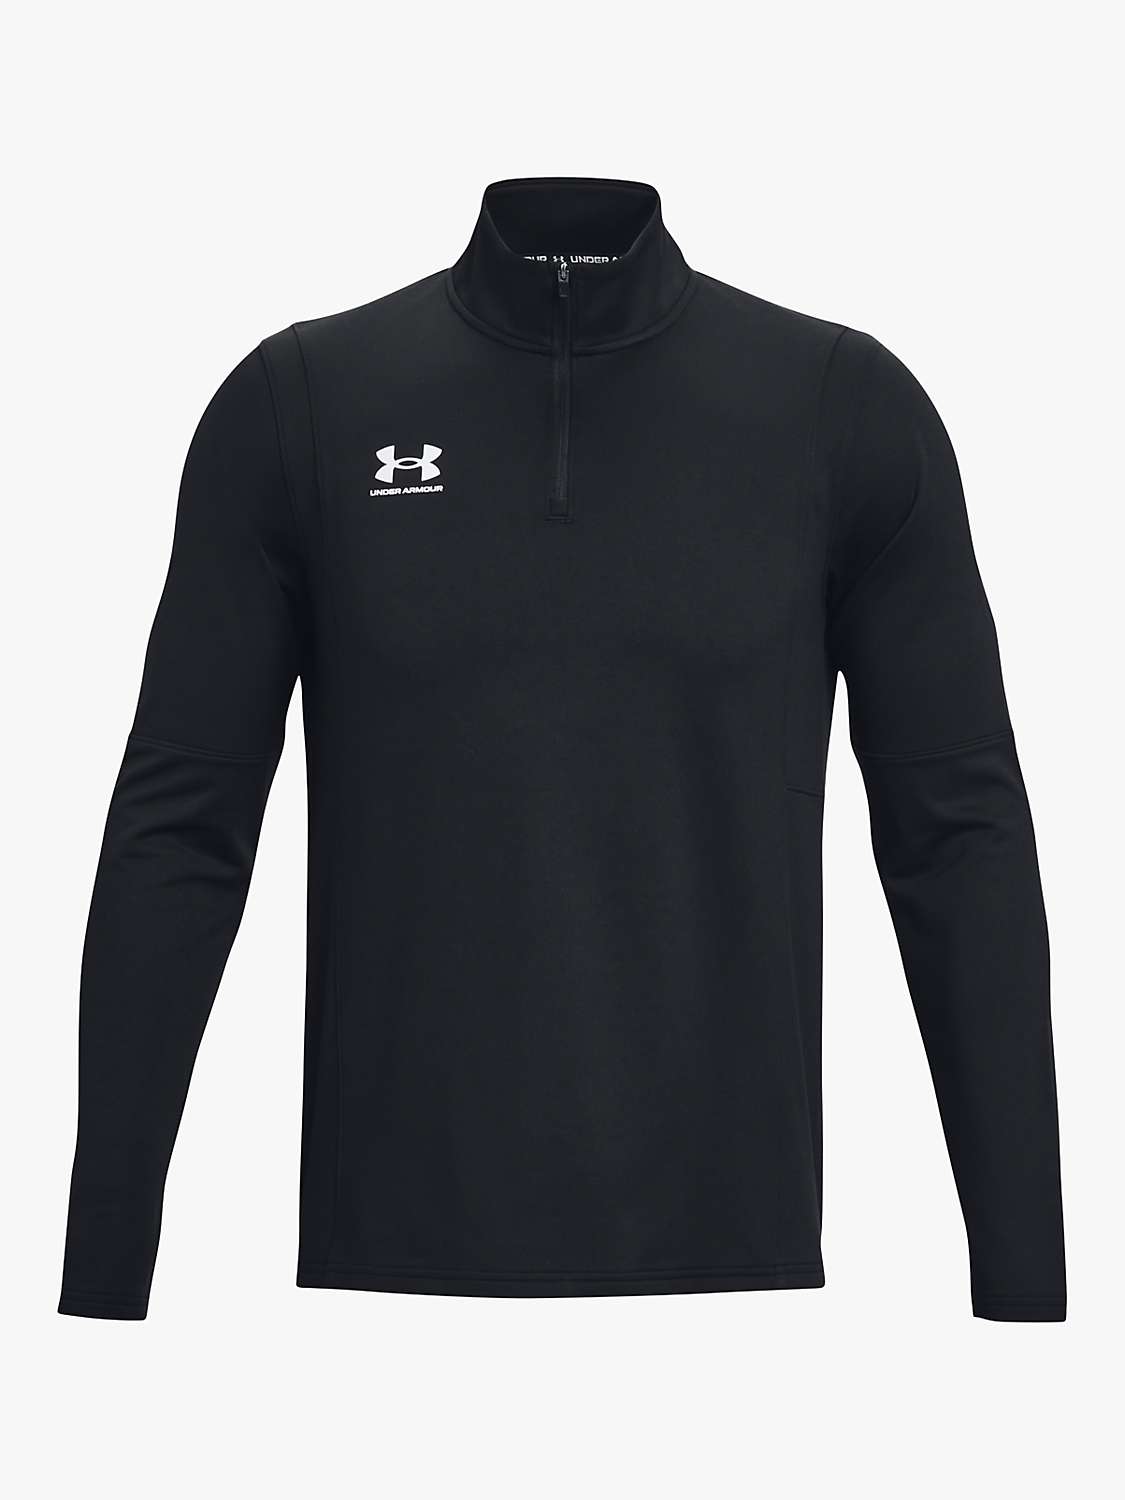 Buy Under Armour Challenger Midlayer 1/4 Zip Long Sleeve Gym Top, Black/White Online at johnlewis.com